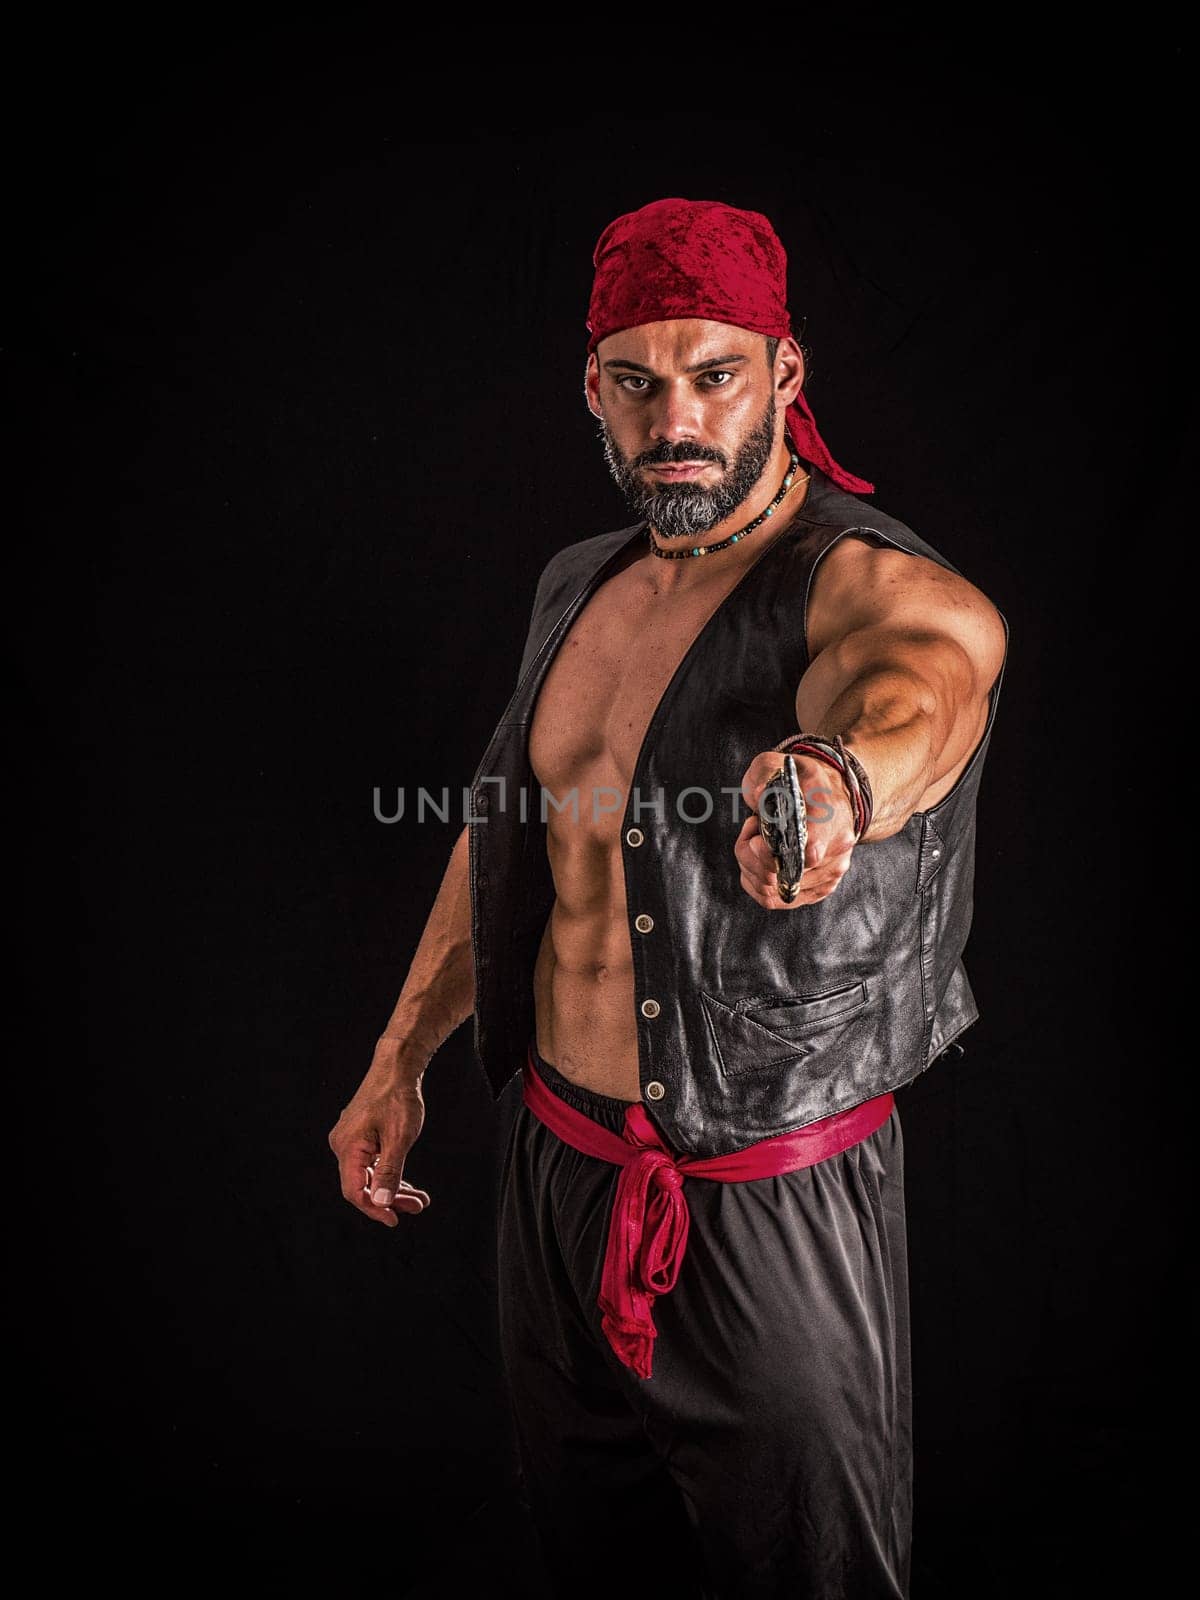 A muscular topless man with a red bandanna and pirate costume, standing in front of a white background. A Brave Soul in Crimson: A Male Bodybuilder with a Red Bandanna Standing Proudly Before a Black Background